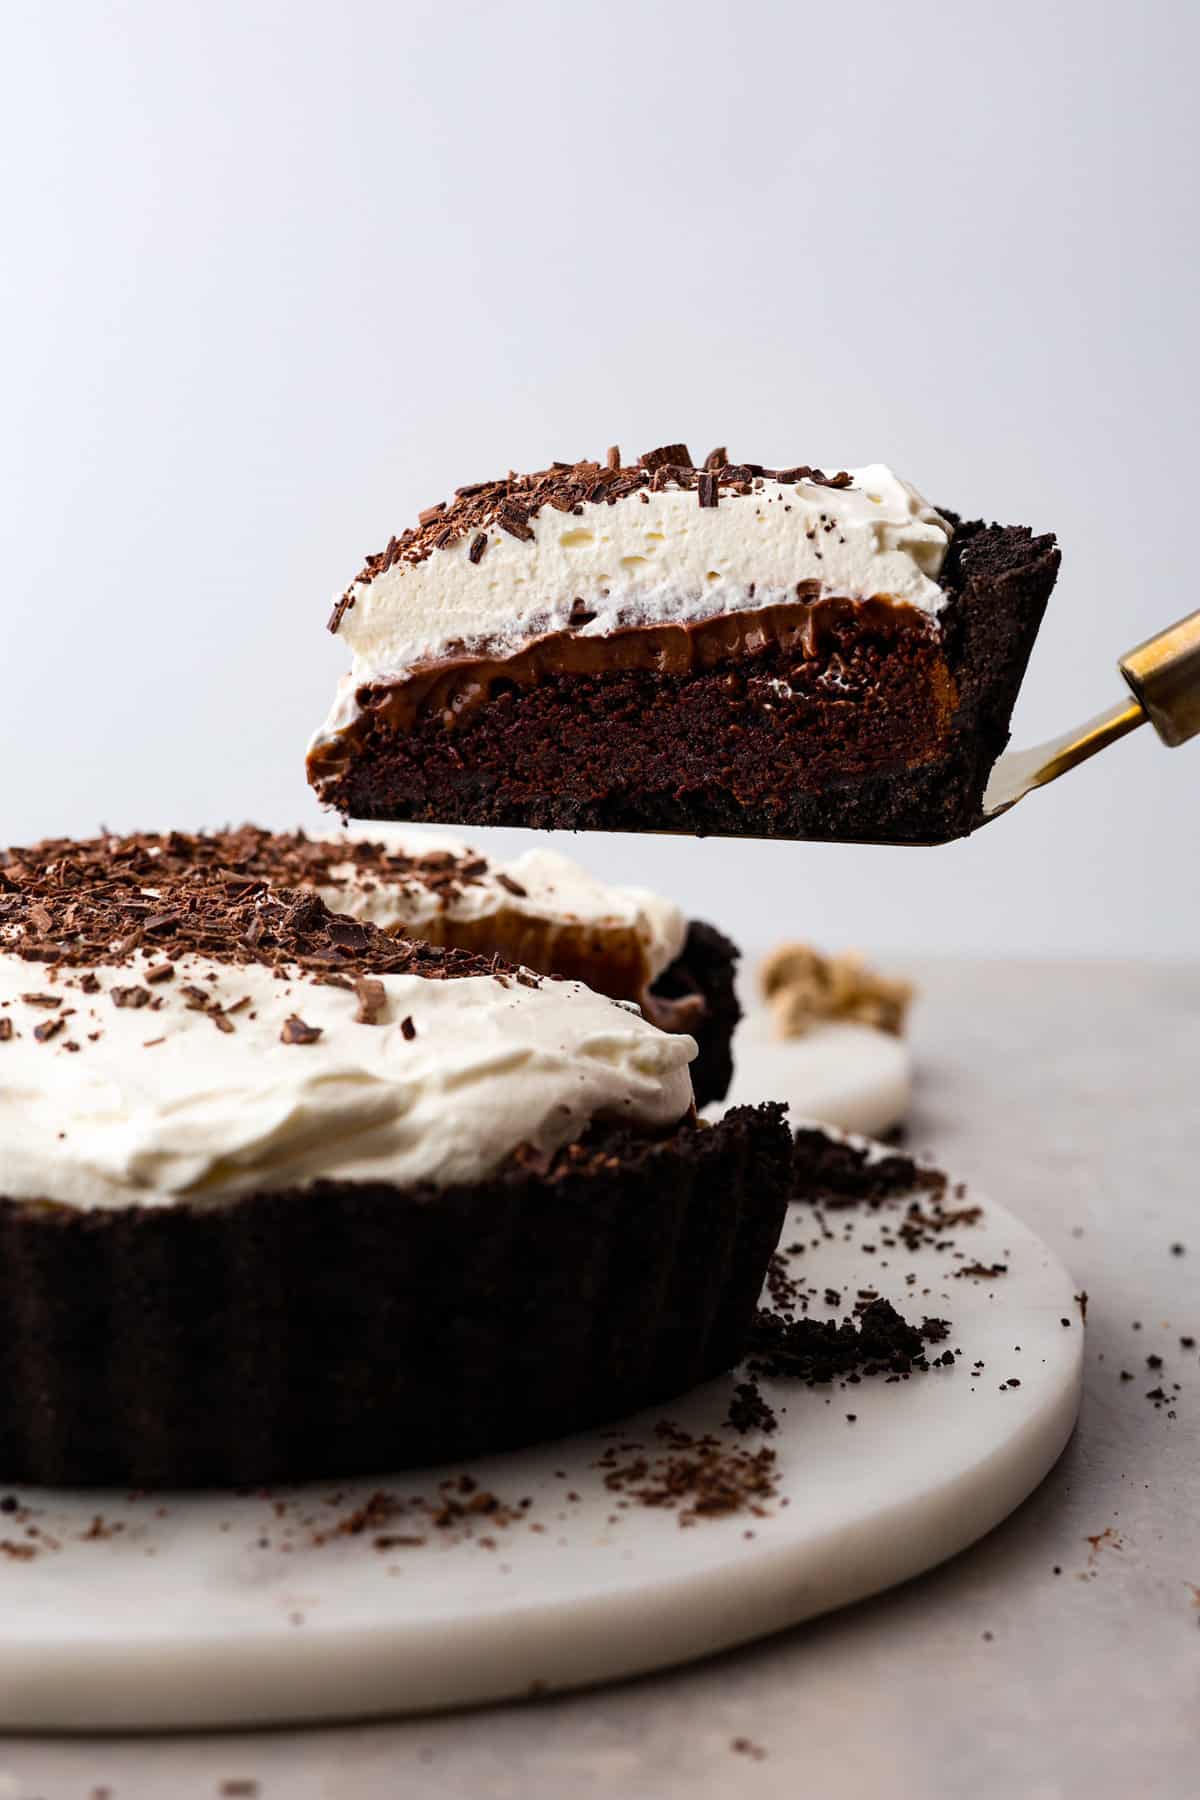 How to Make the Ultimate Mississippi Mud Pie